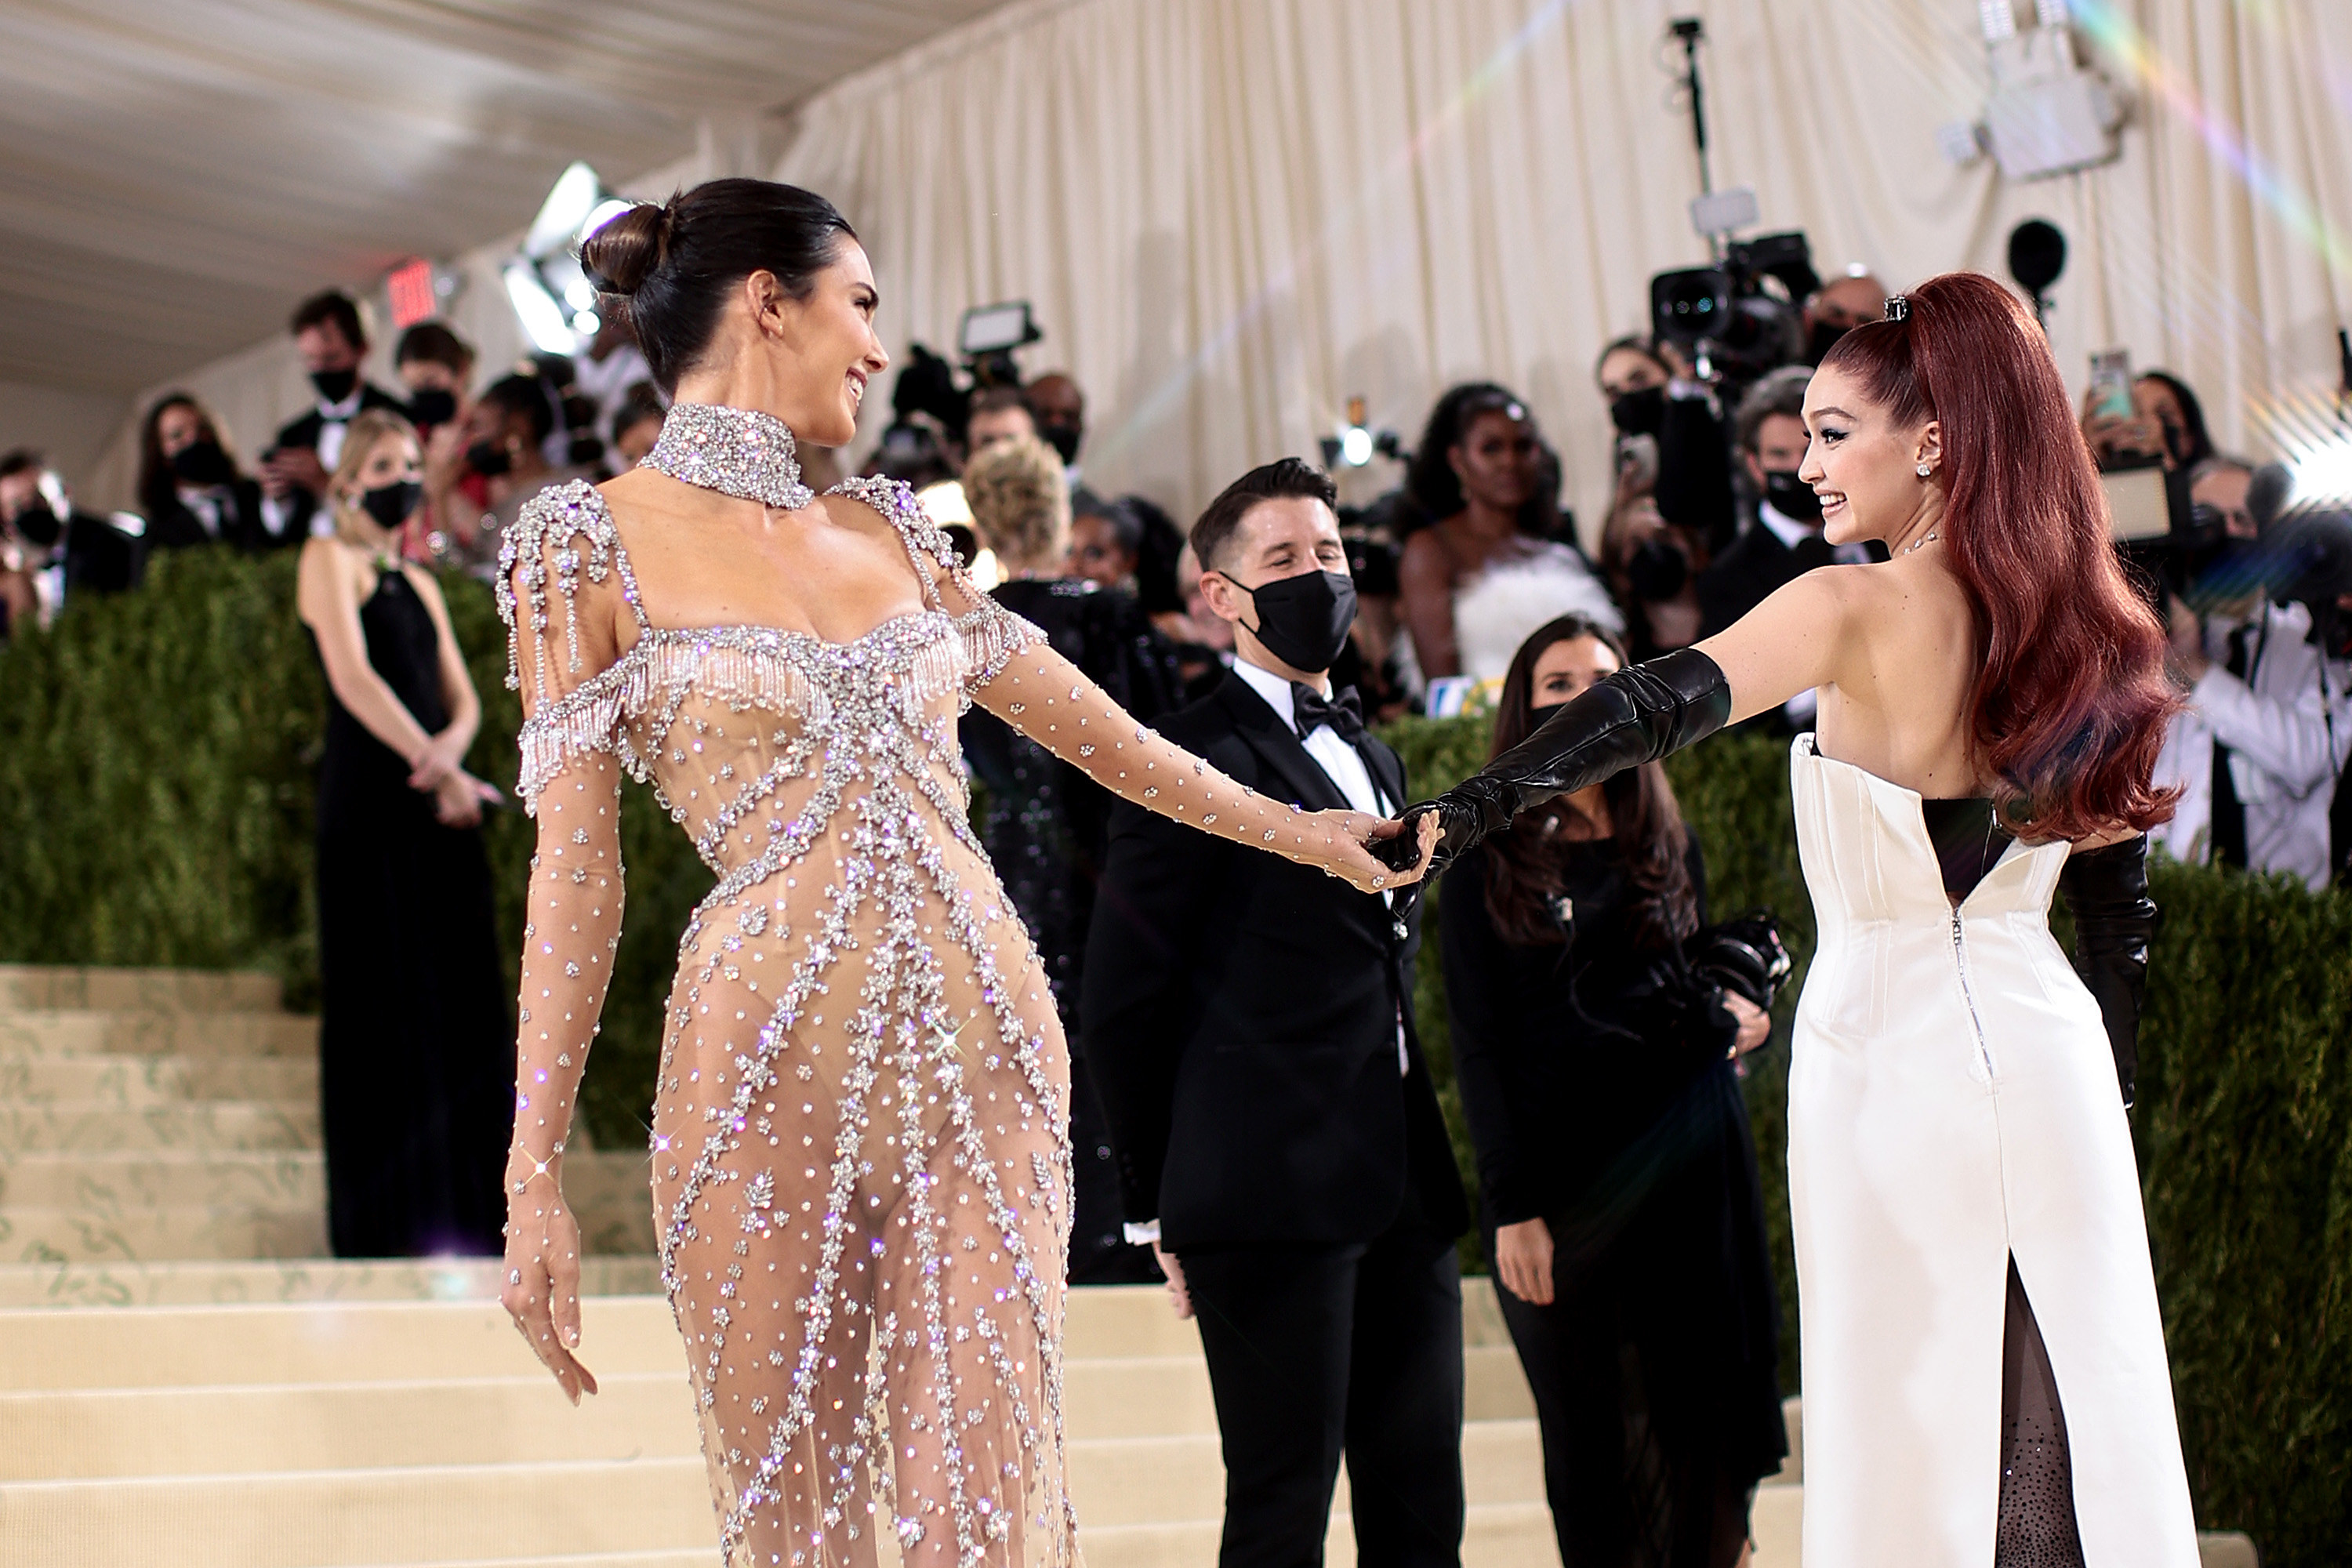 Kendall Jenner holding hands with Gigi Hadid on the Met Gala red carpet